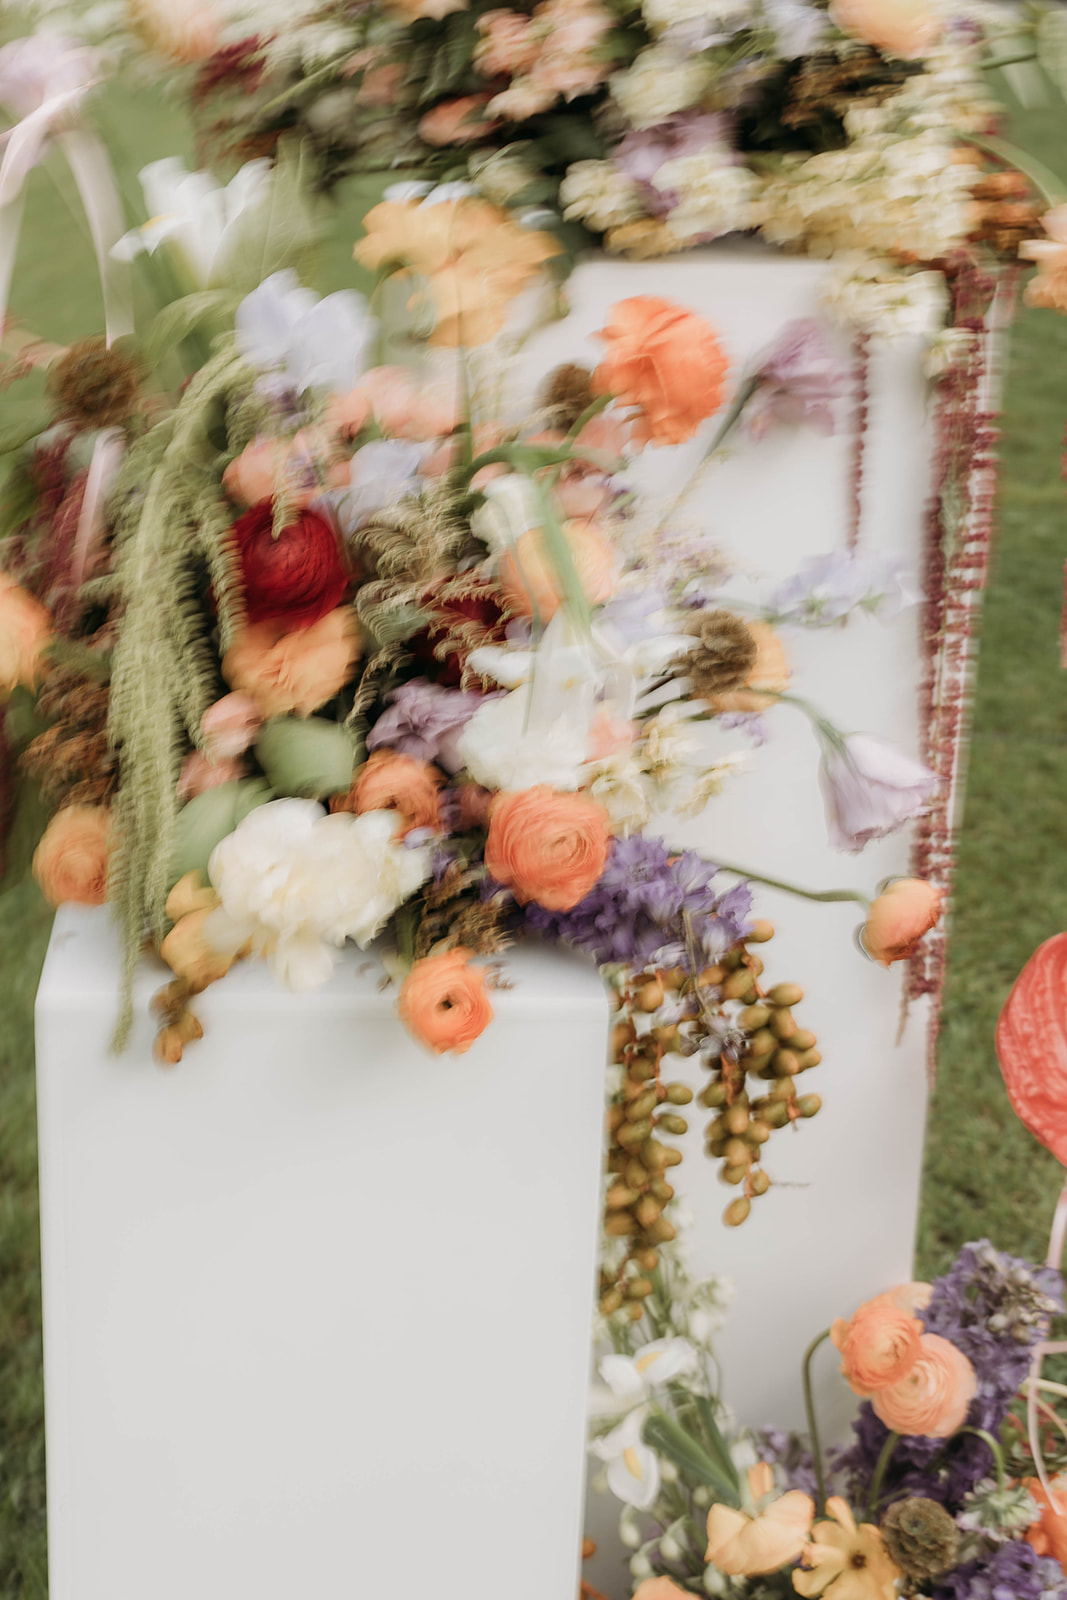 A spring festival style wedding with colorful accents and nostalgic dresses at Texas Discovery Gardens